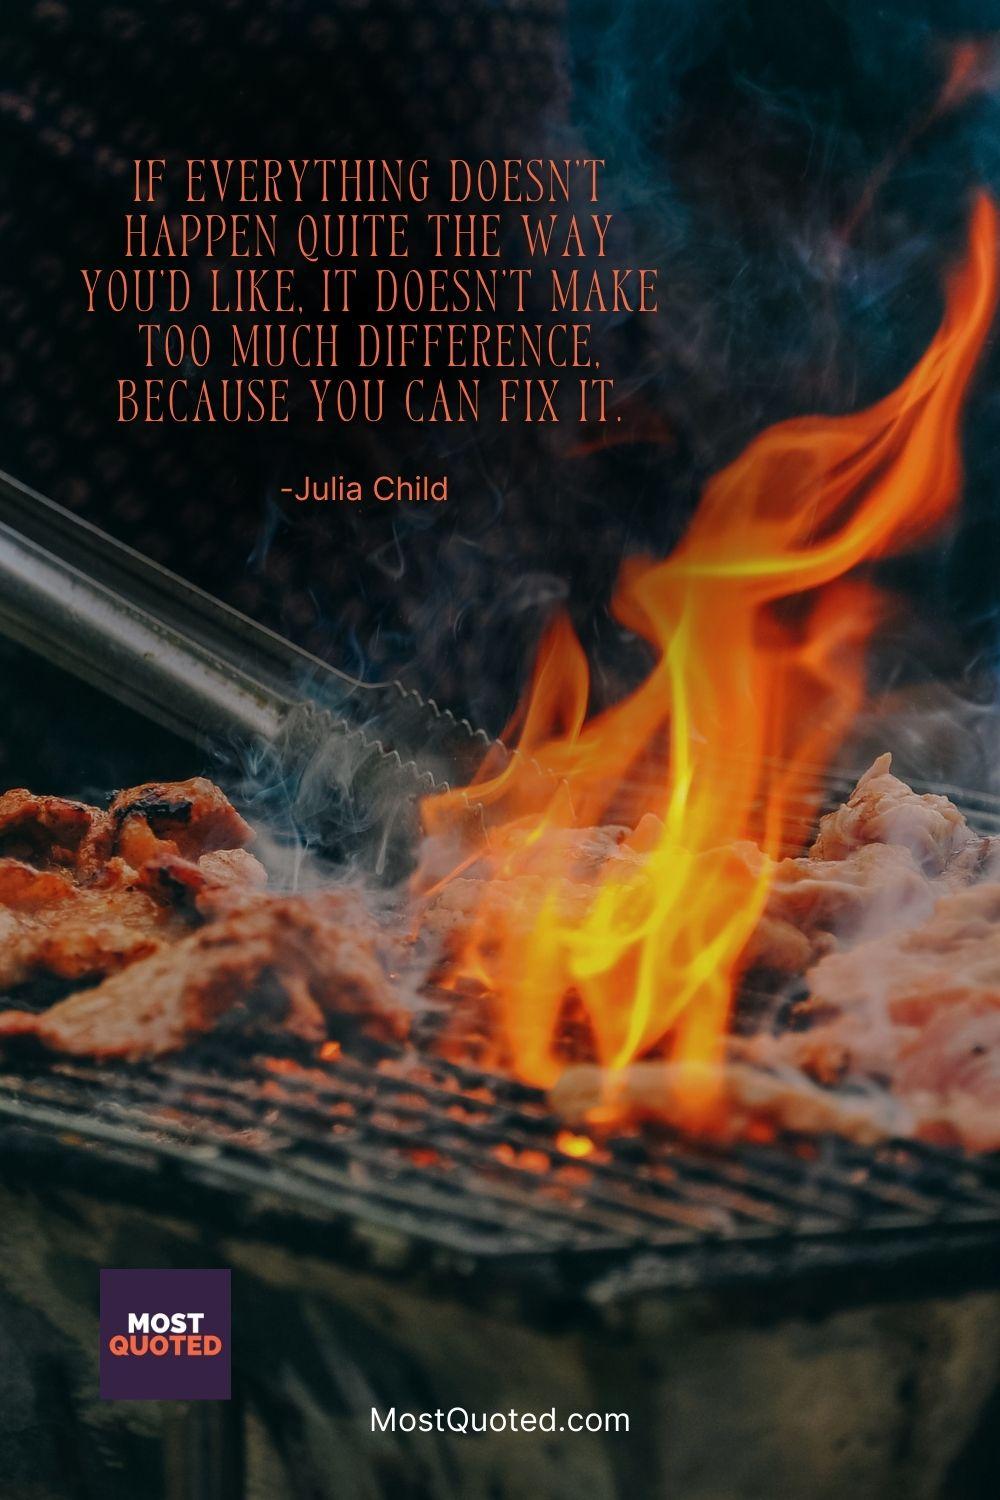 If everything doesn’t happen quite the way you’d like, it doesn’t make too much difference, because you can fix it. - Julia Child